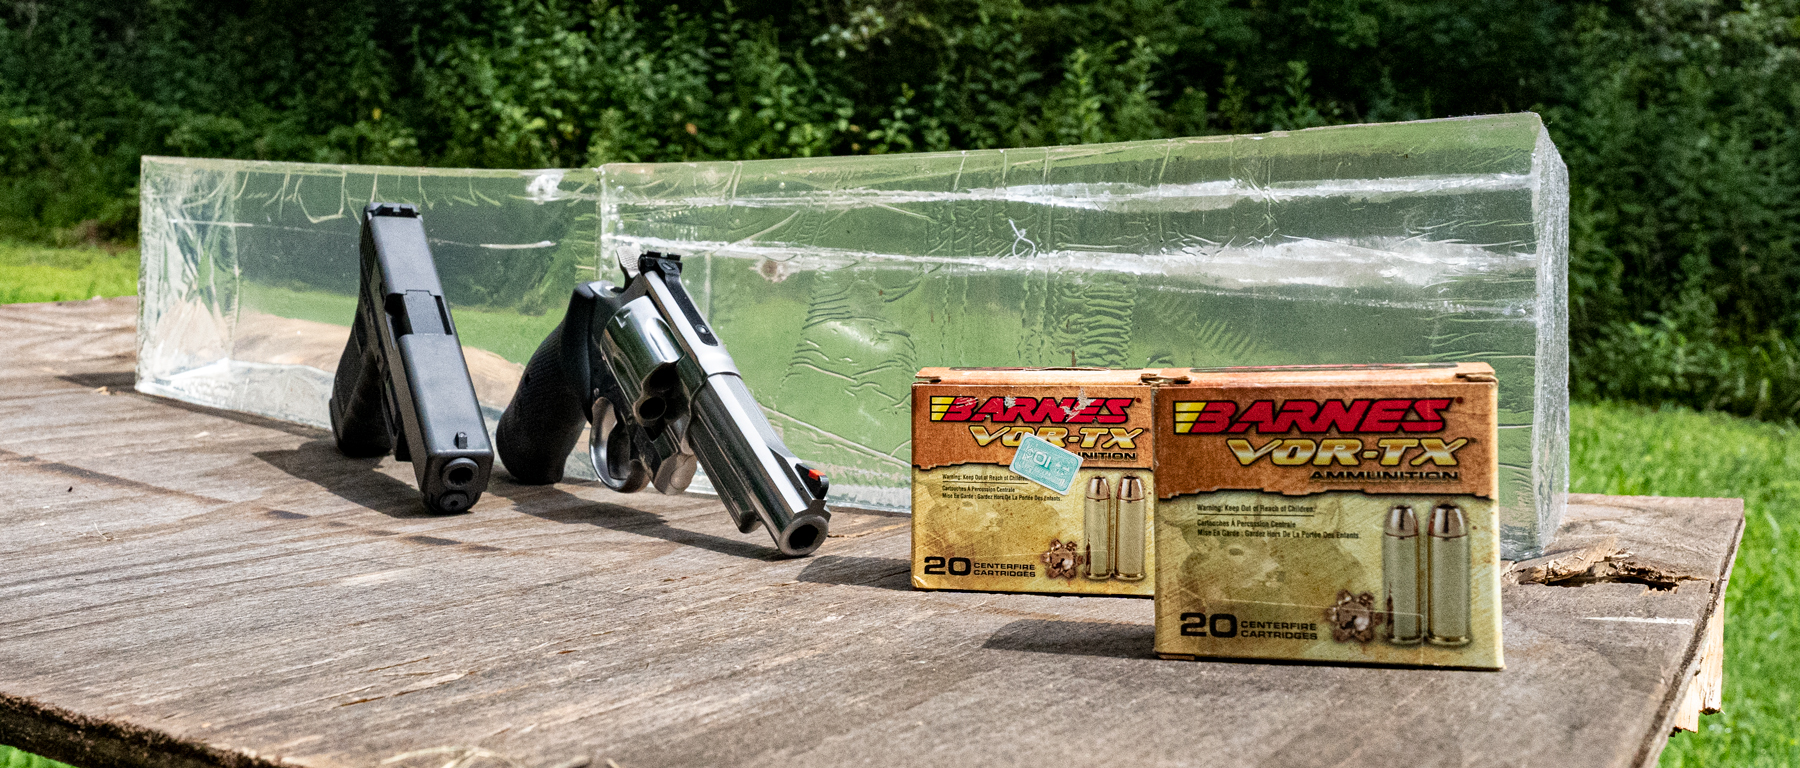 Comparing 10mm and 44 magnum ammo and guns with ballistic gel at a shooting range